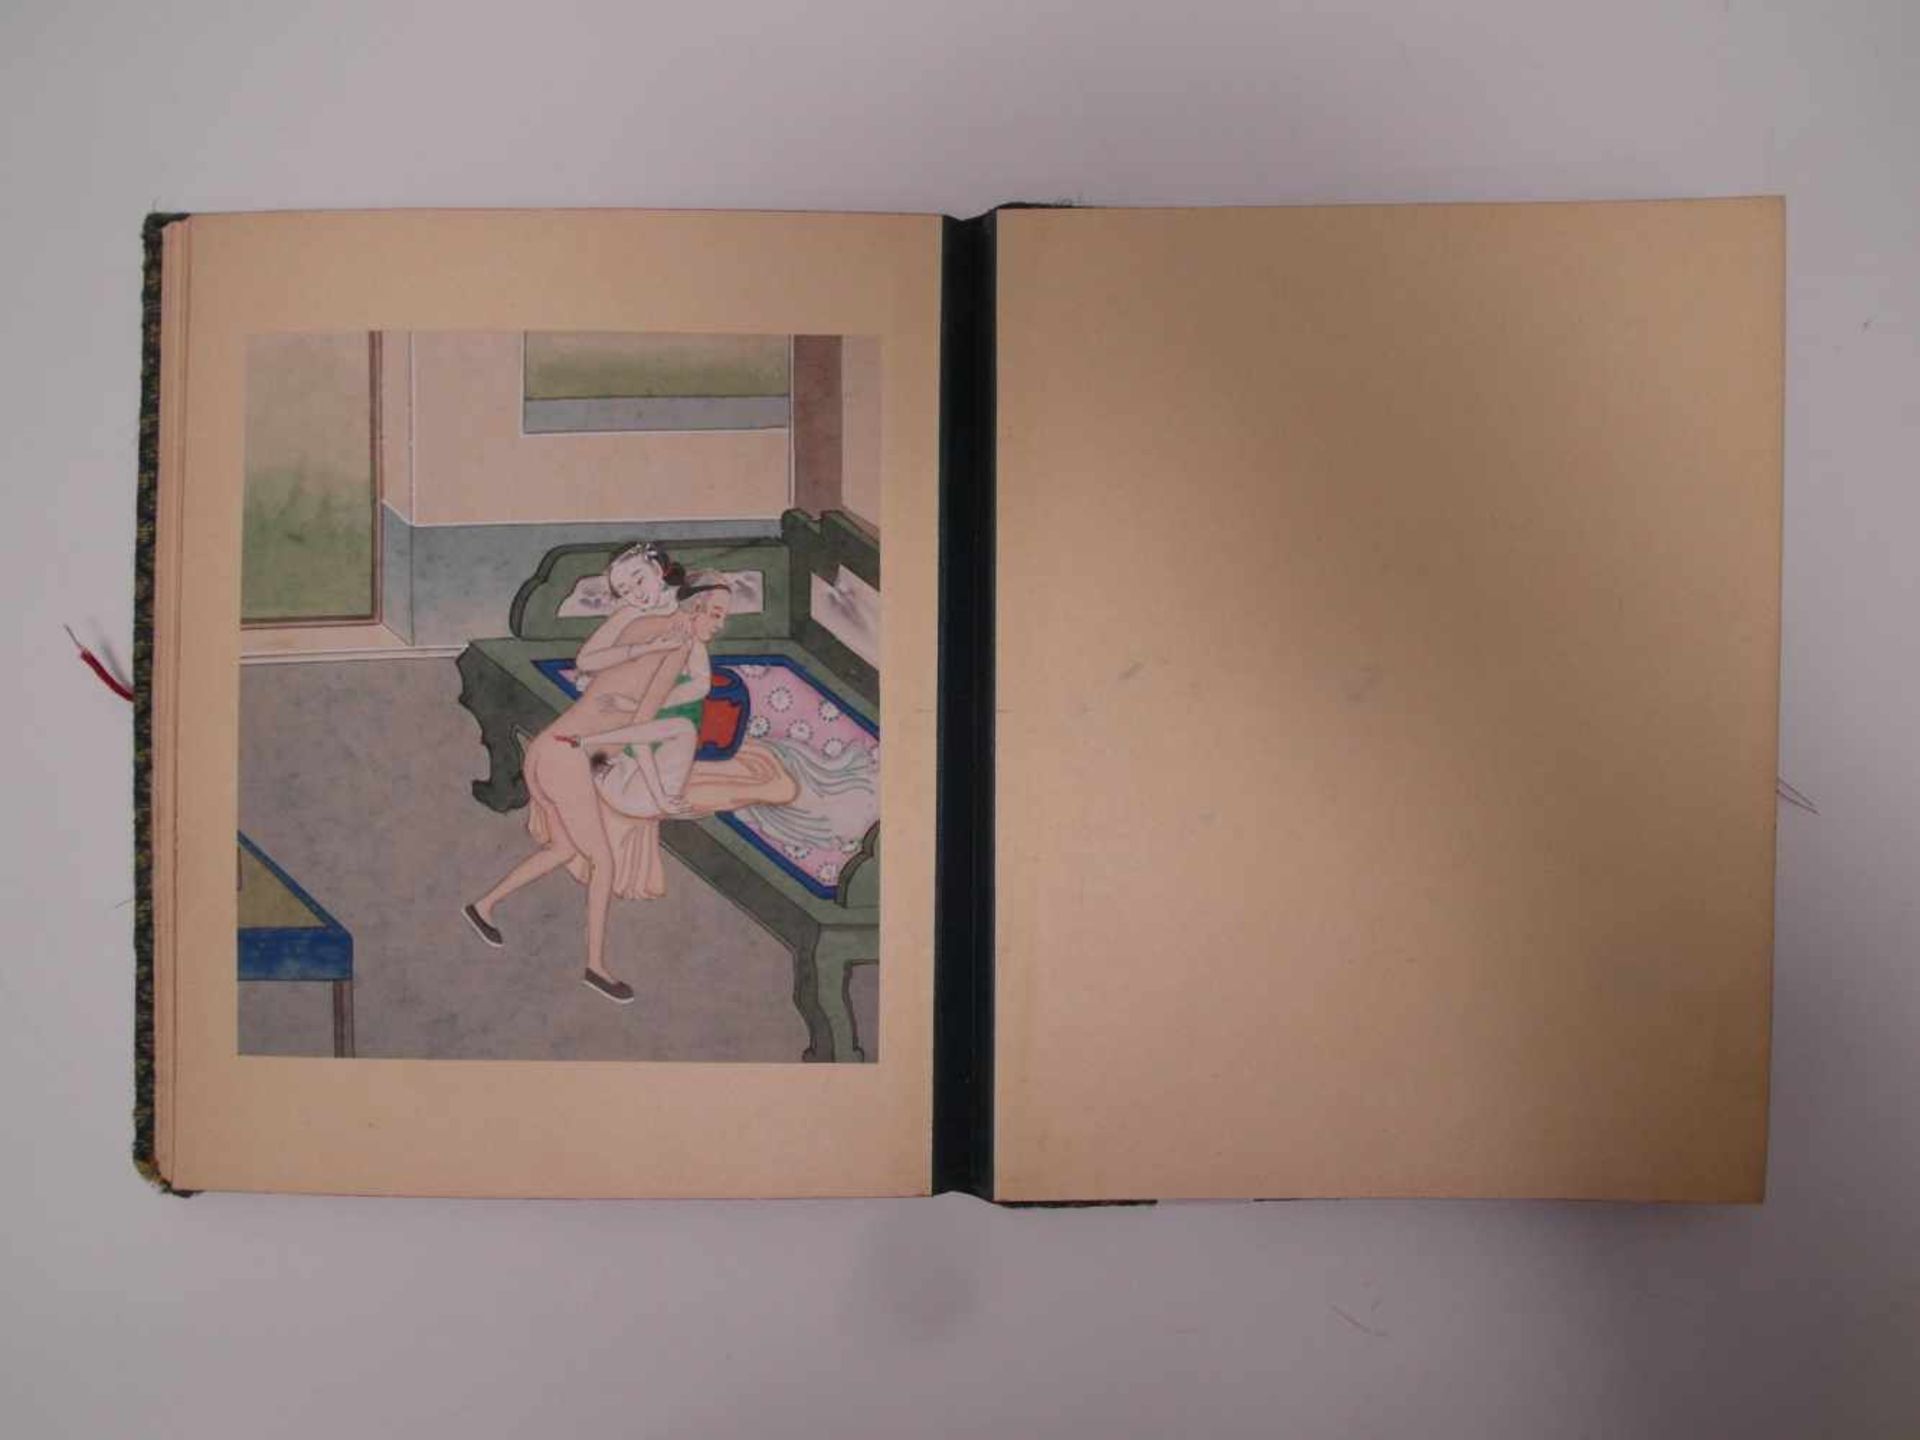 ALBUM WITH TWELVE EROTIC PAINTINGS. China. Qing dynasty. 18th/19th c. Ink and pigments on paper. The - Bild 4 aus 14